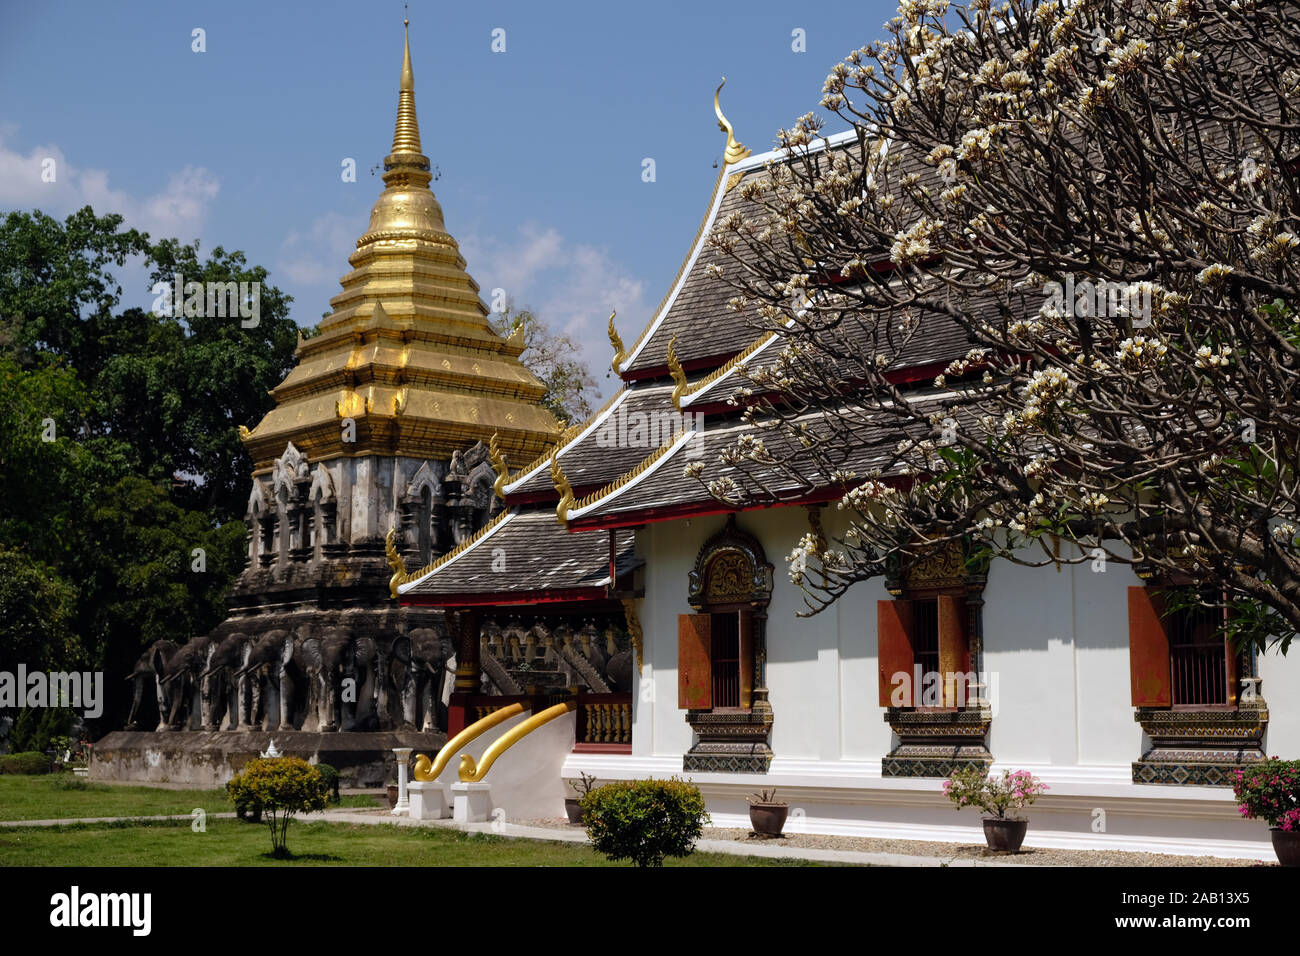 Religious places - Buddhism Thailand Chiang Mai Wat Chiang Man Stock Photo